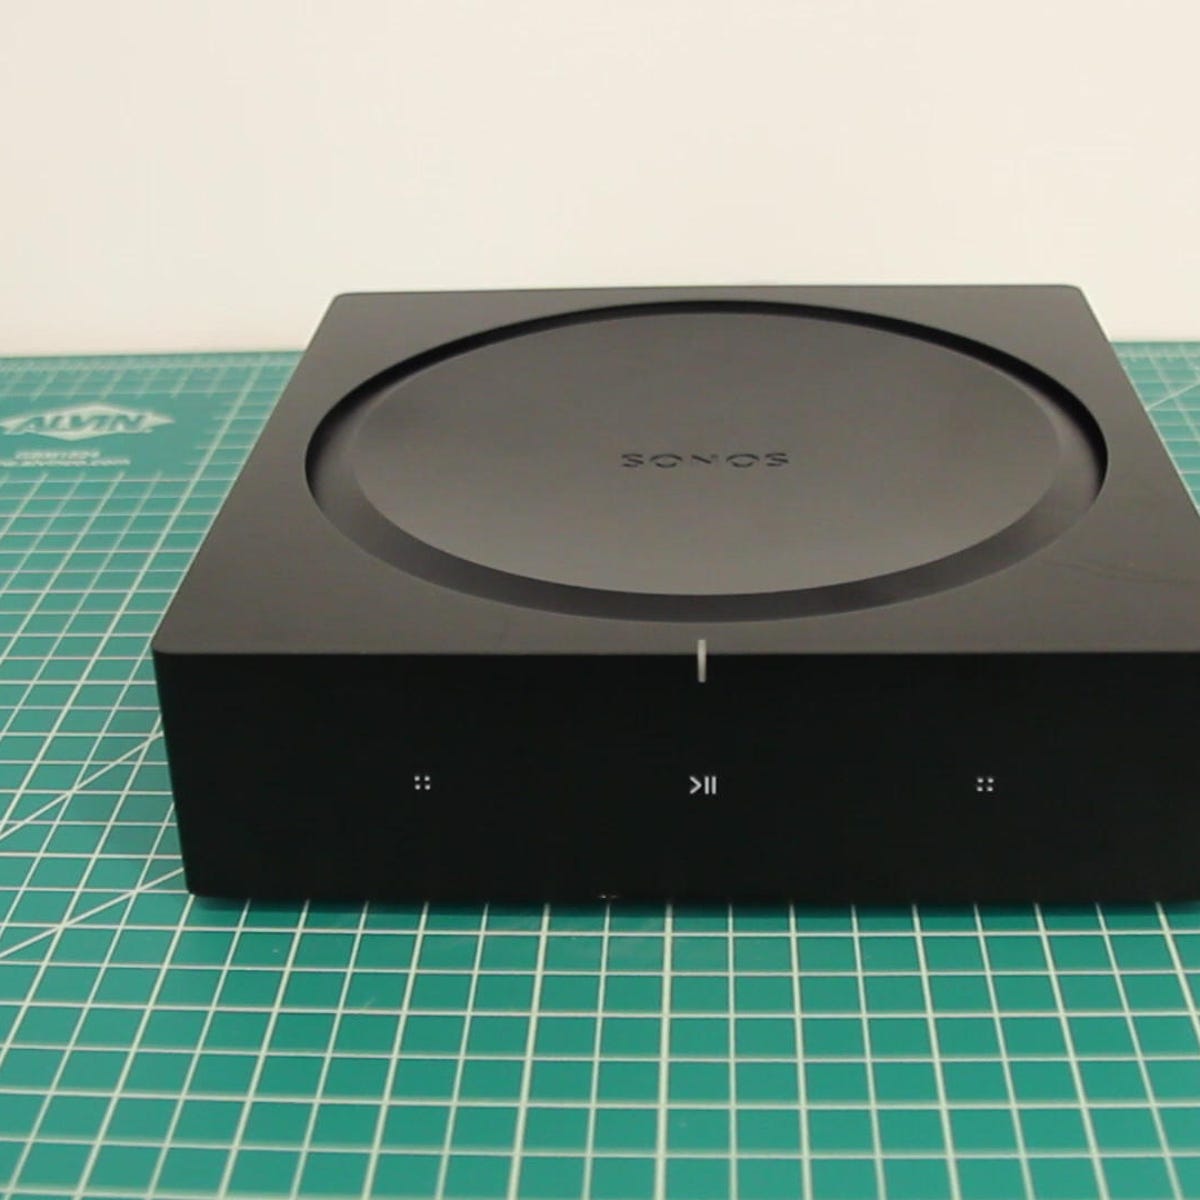 Hest Jane Austen midnat Sonos Amp review: Sonos Amp gets TV-friendly HDMI, beefed-up power, $600  price tag - CNET